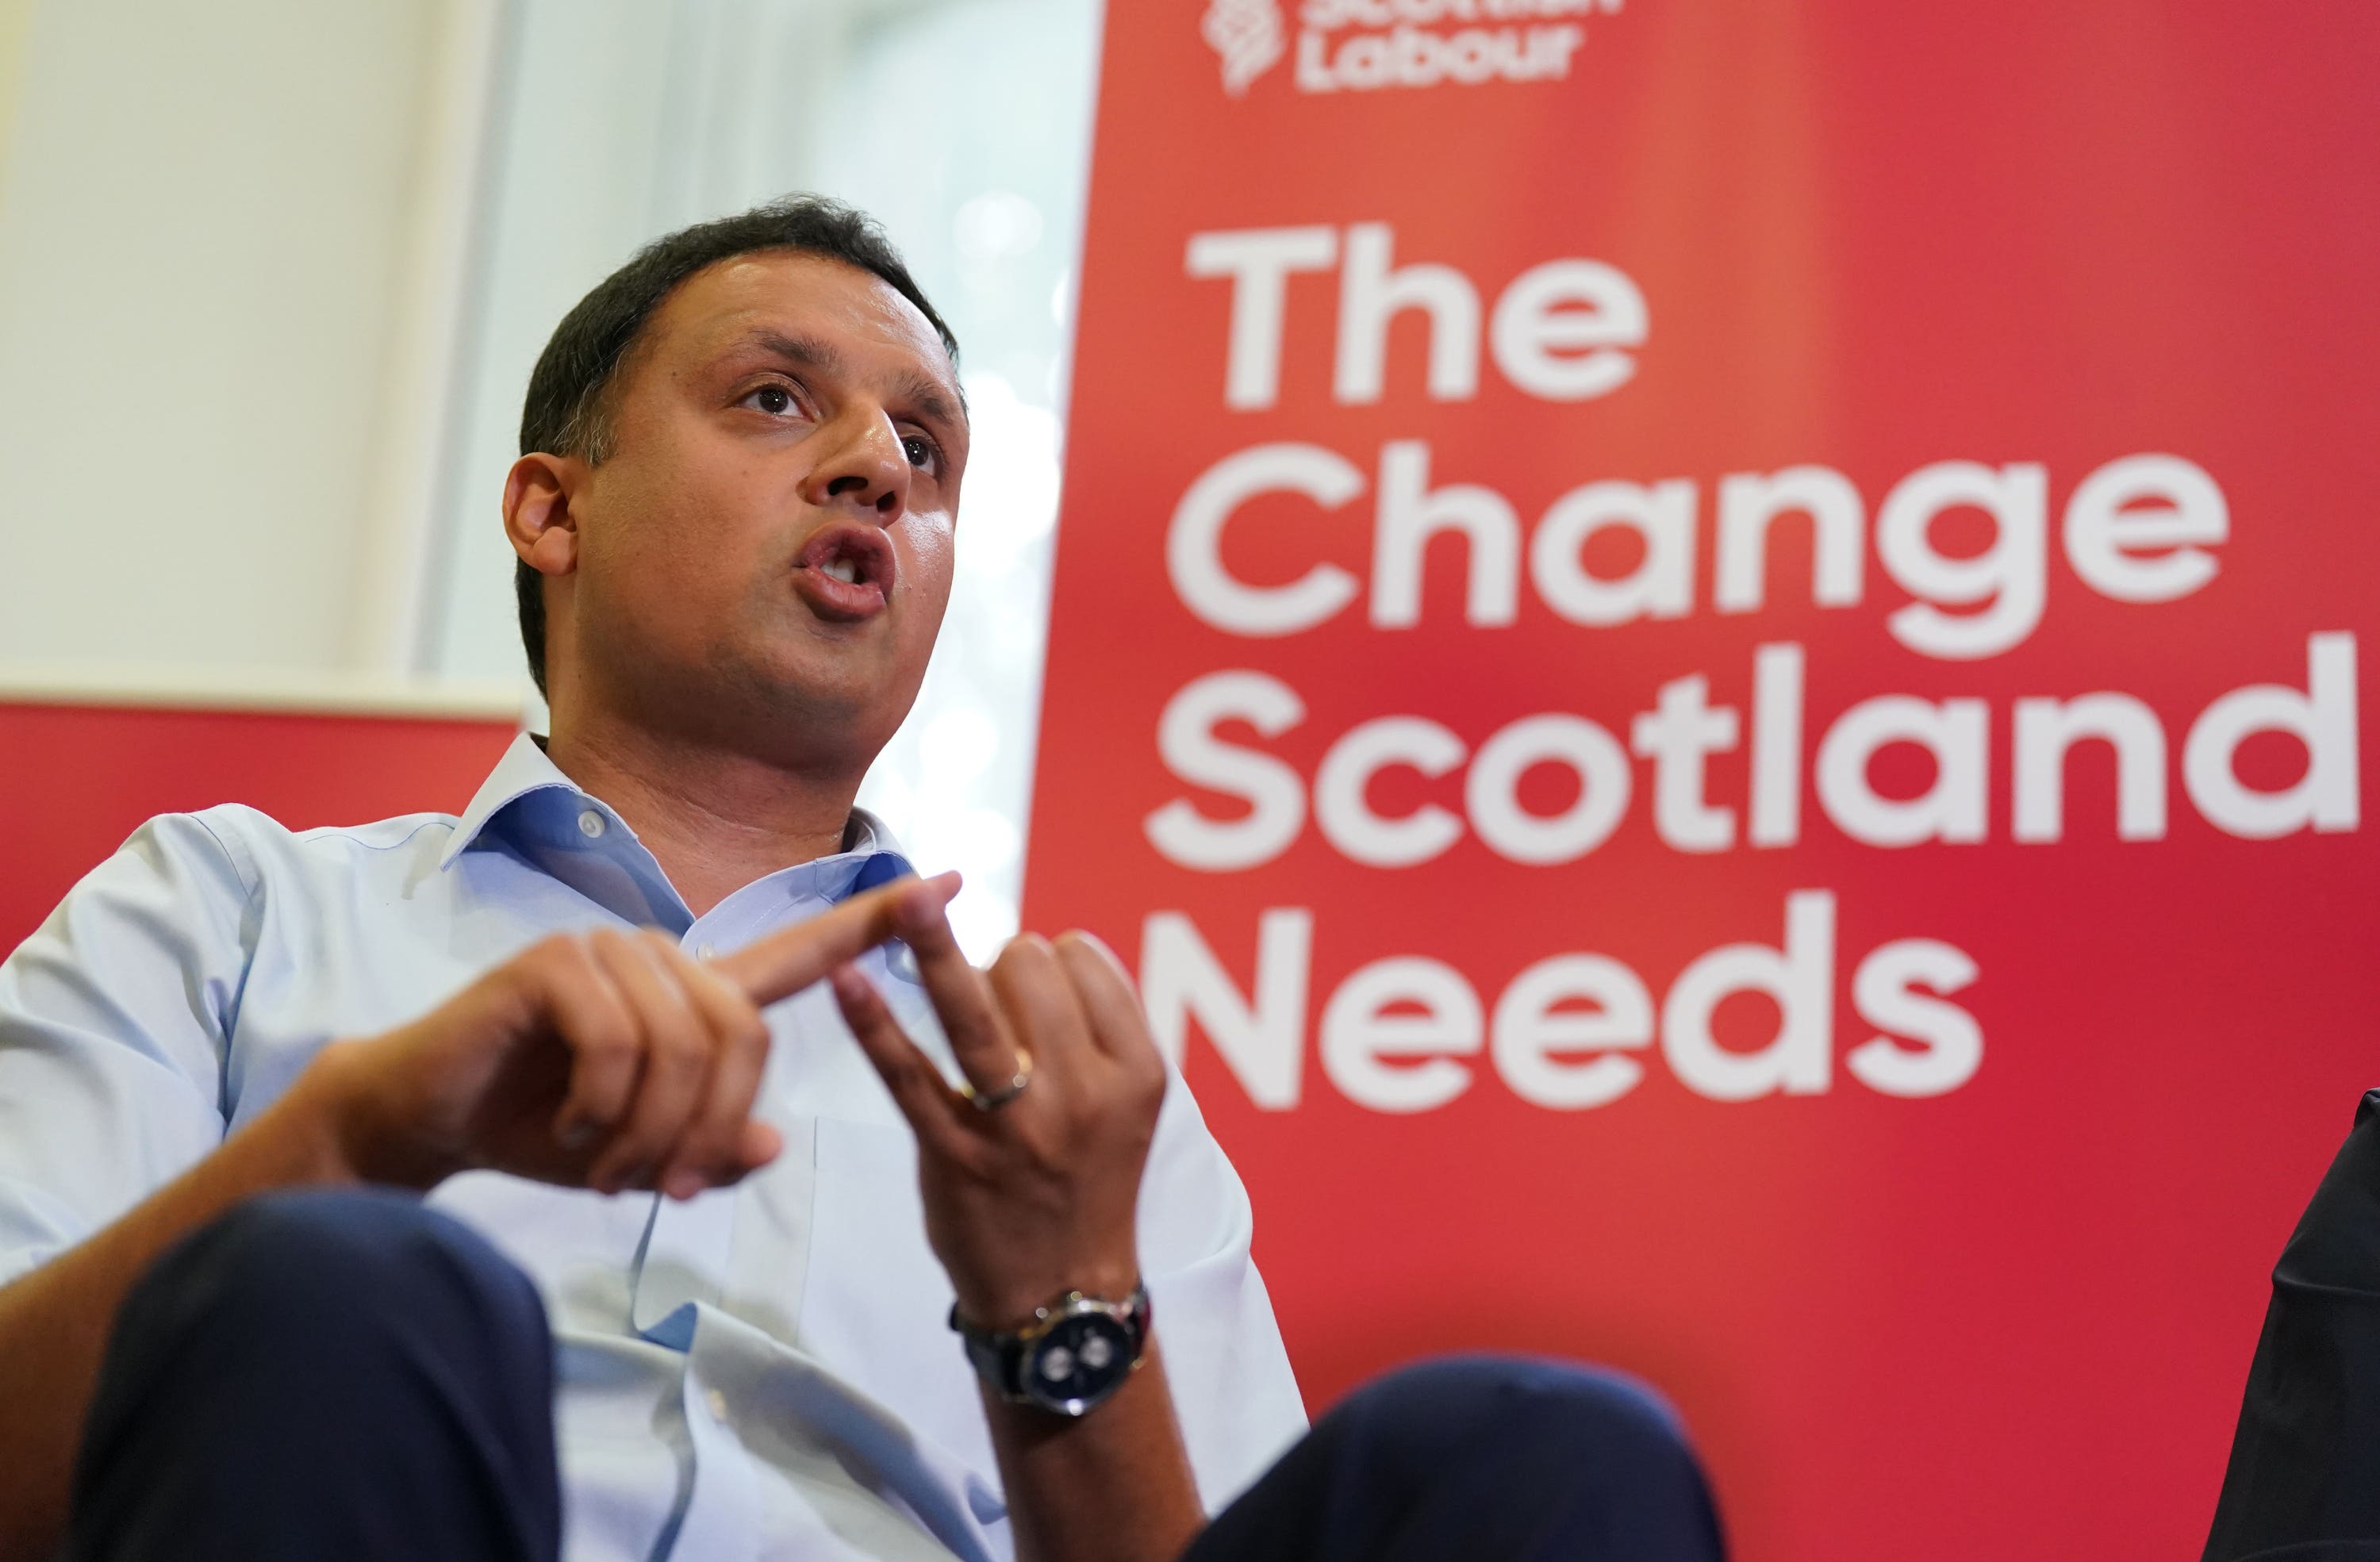 Anas Sarwar said party politics are not important as he plans how to deliver economic prosperity for Scotland.